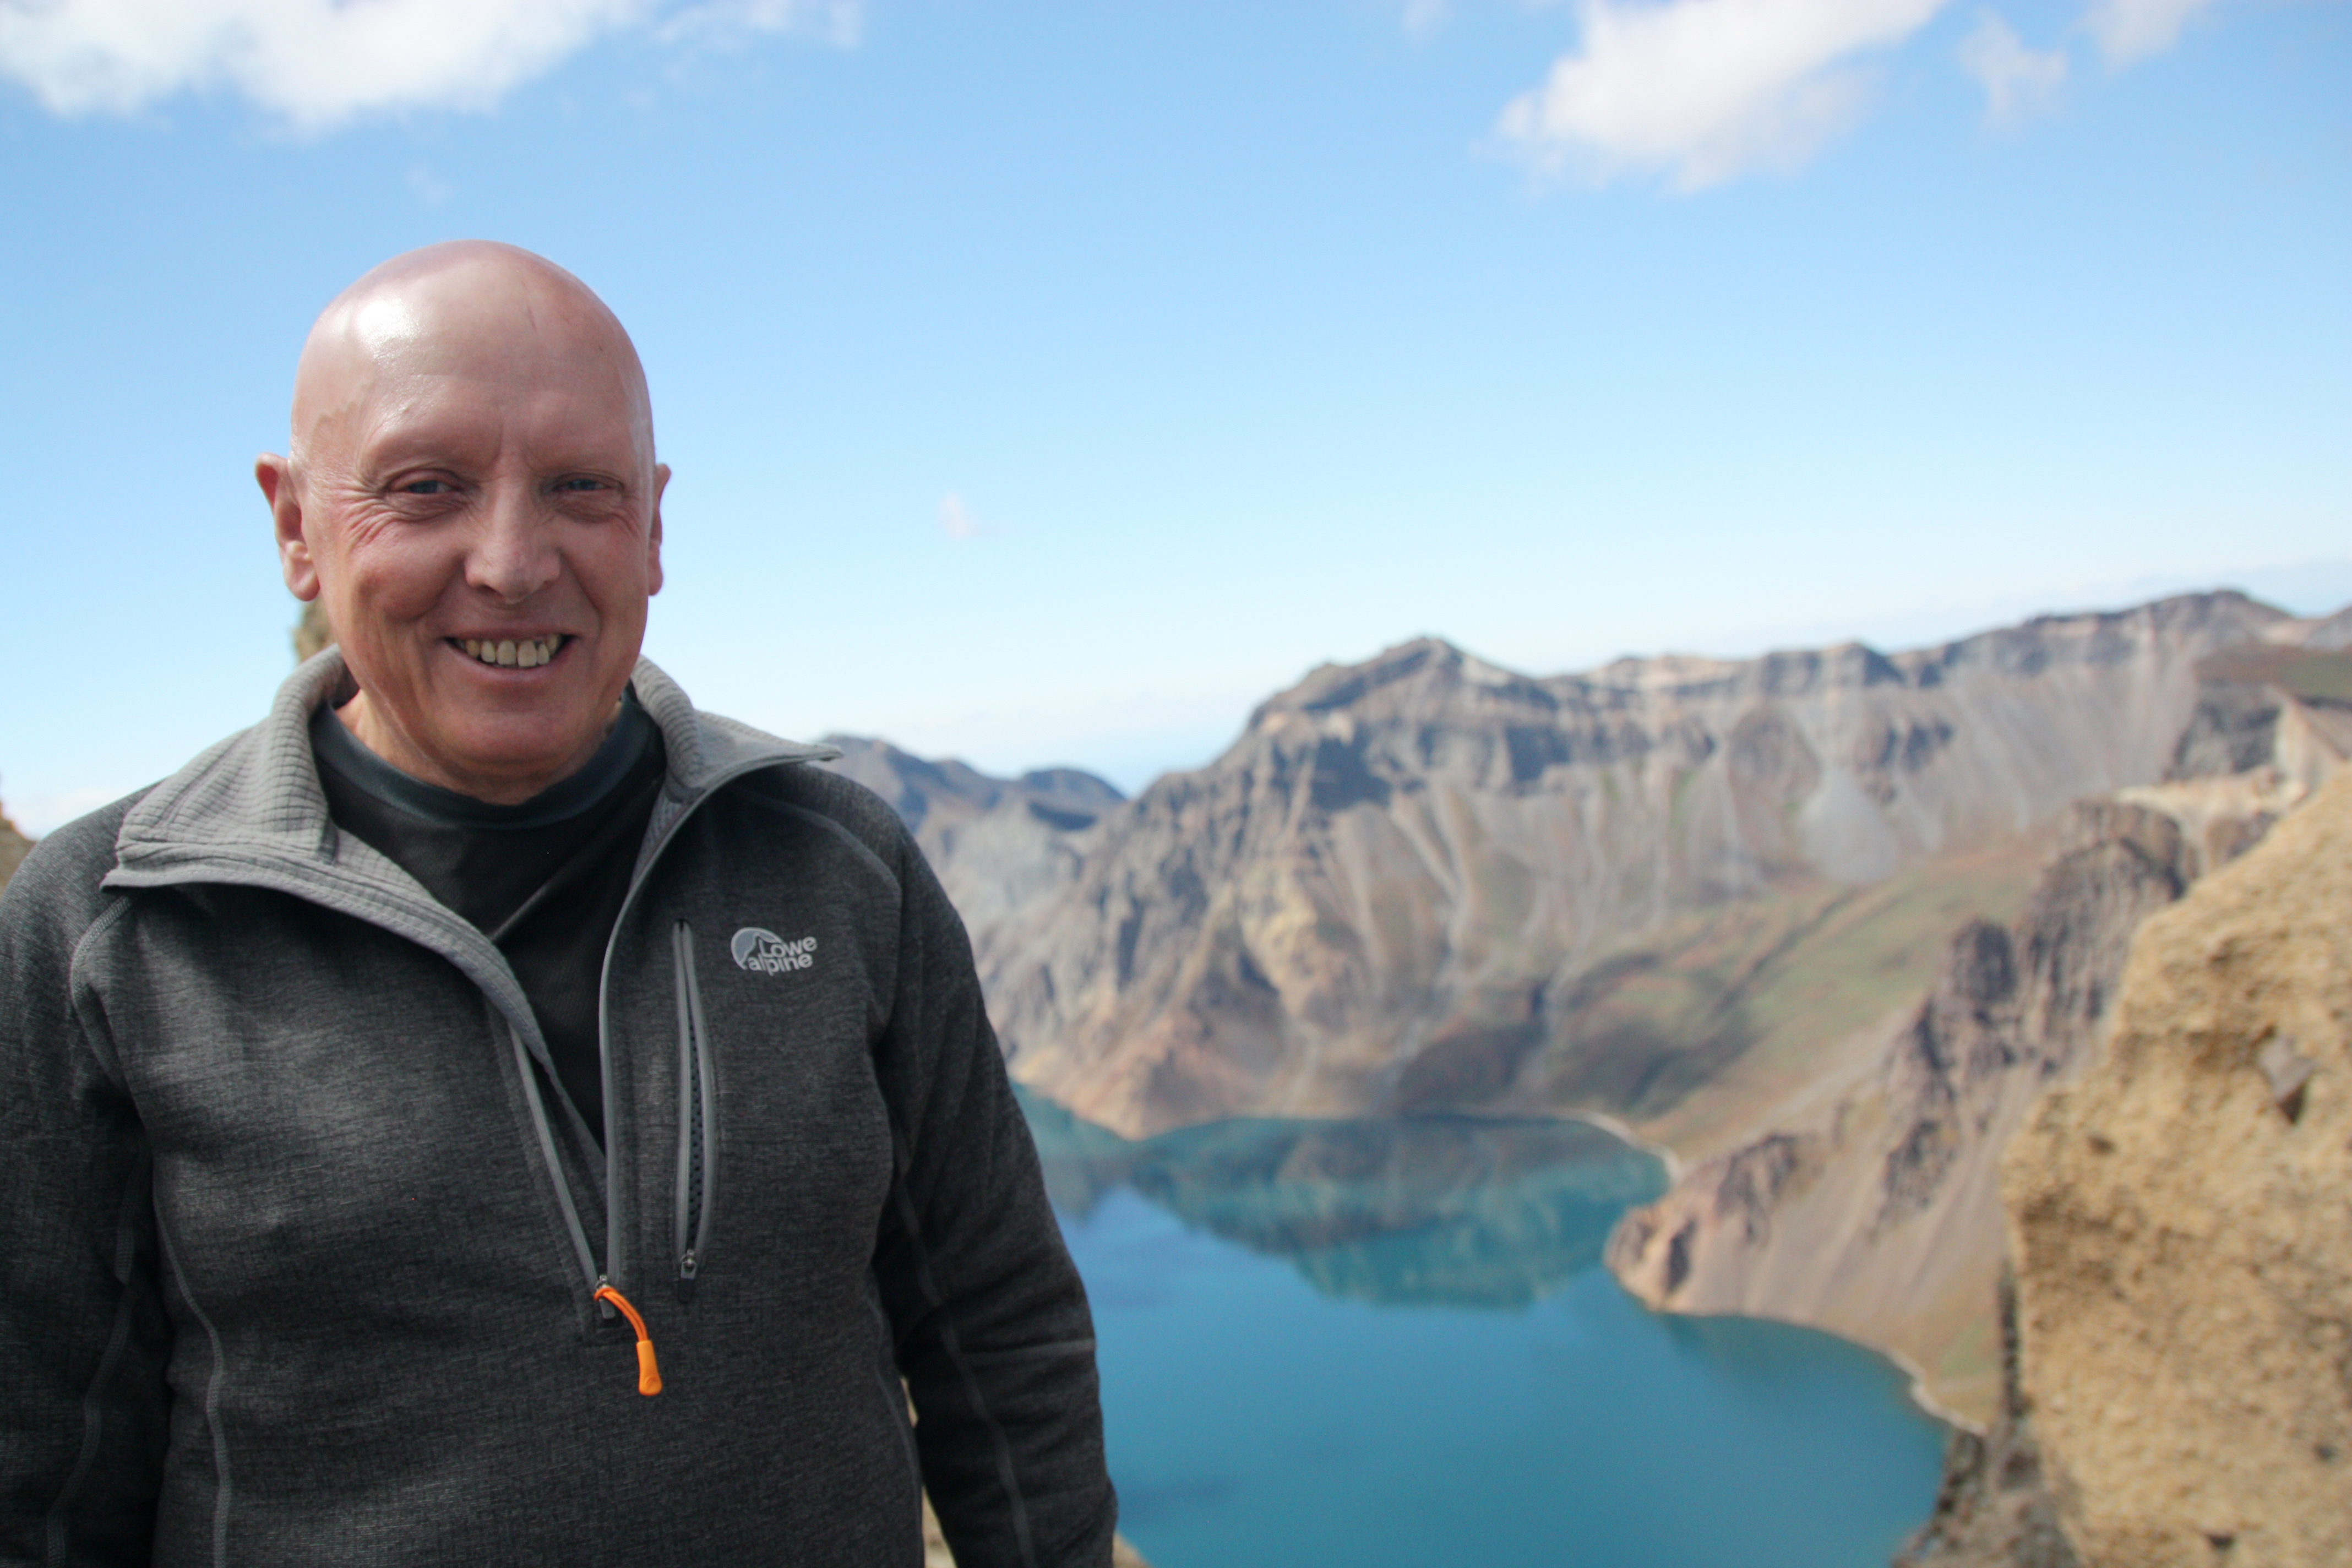 Bob during his visit to Changbai Mountain in northern China